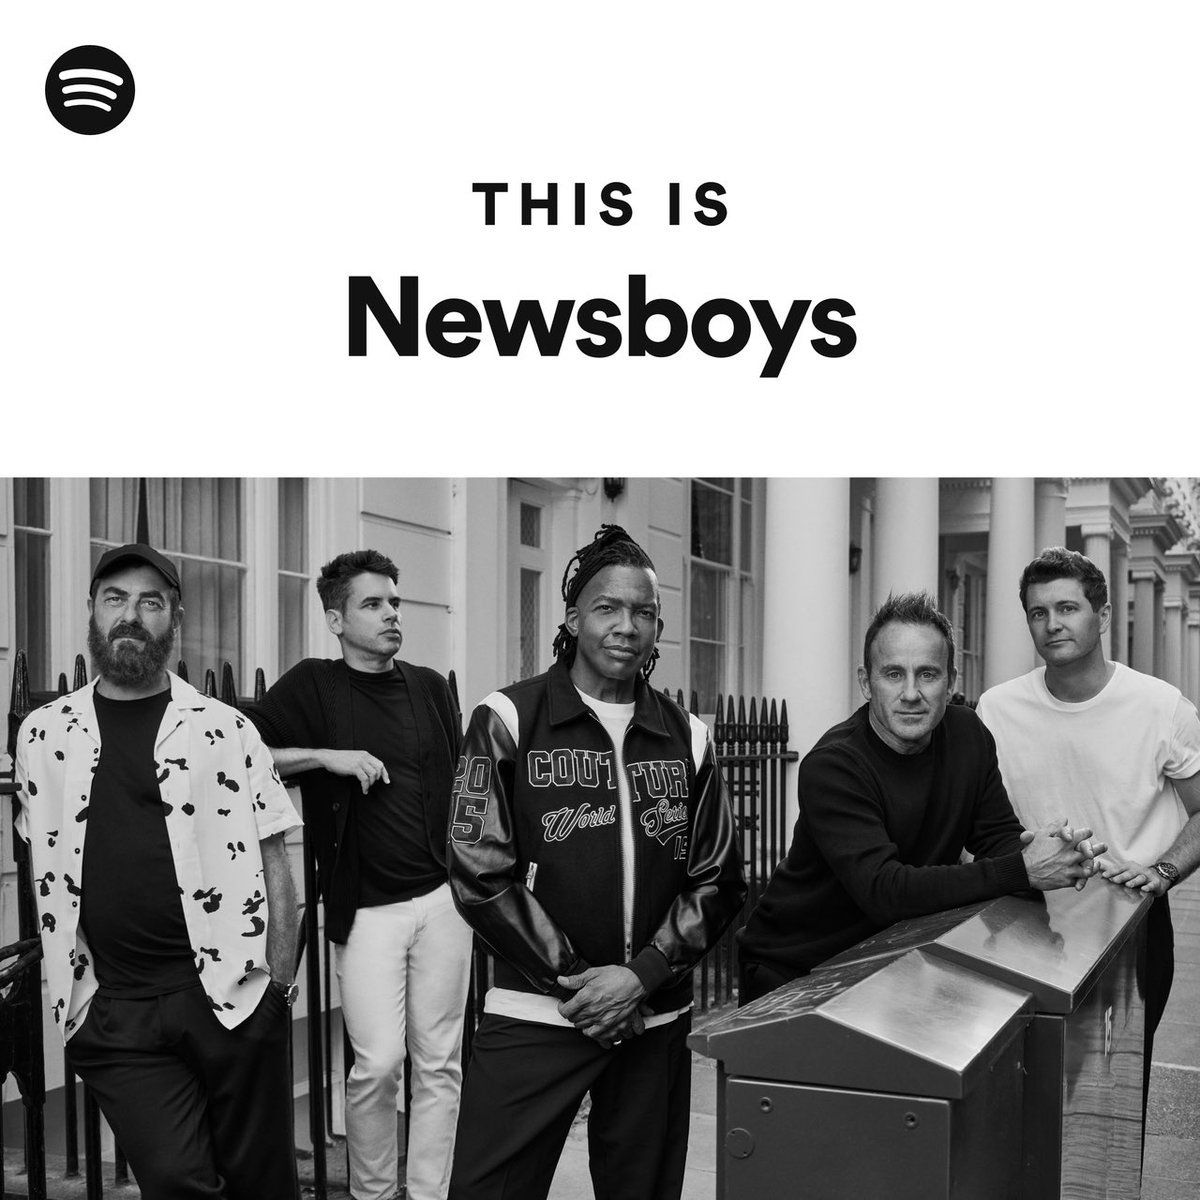 All your favorite songs, in one place! 💥 Shouout to @SOZOPlaylists & @Spotify! Be sure to check out Newsboys: Essentials & add your fav songs to YOUR playlists! 📲 Check it out ➡️➡️ open.spotify.com/playlist/37i9d…